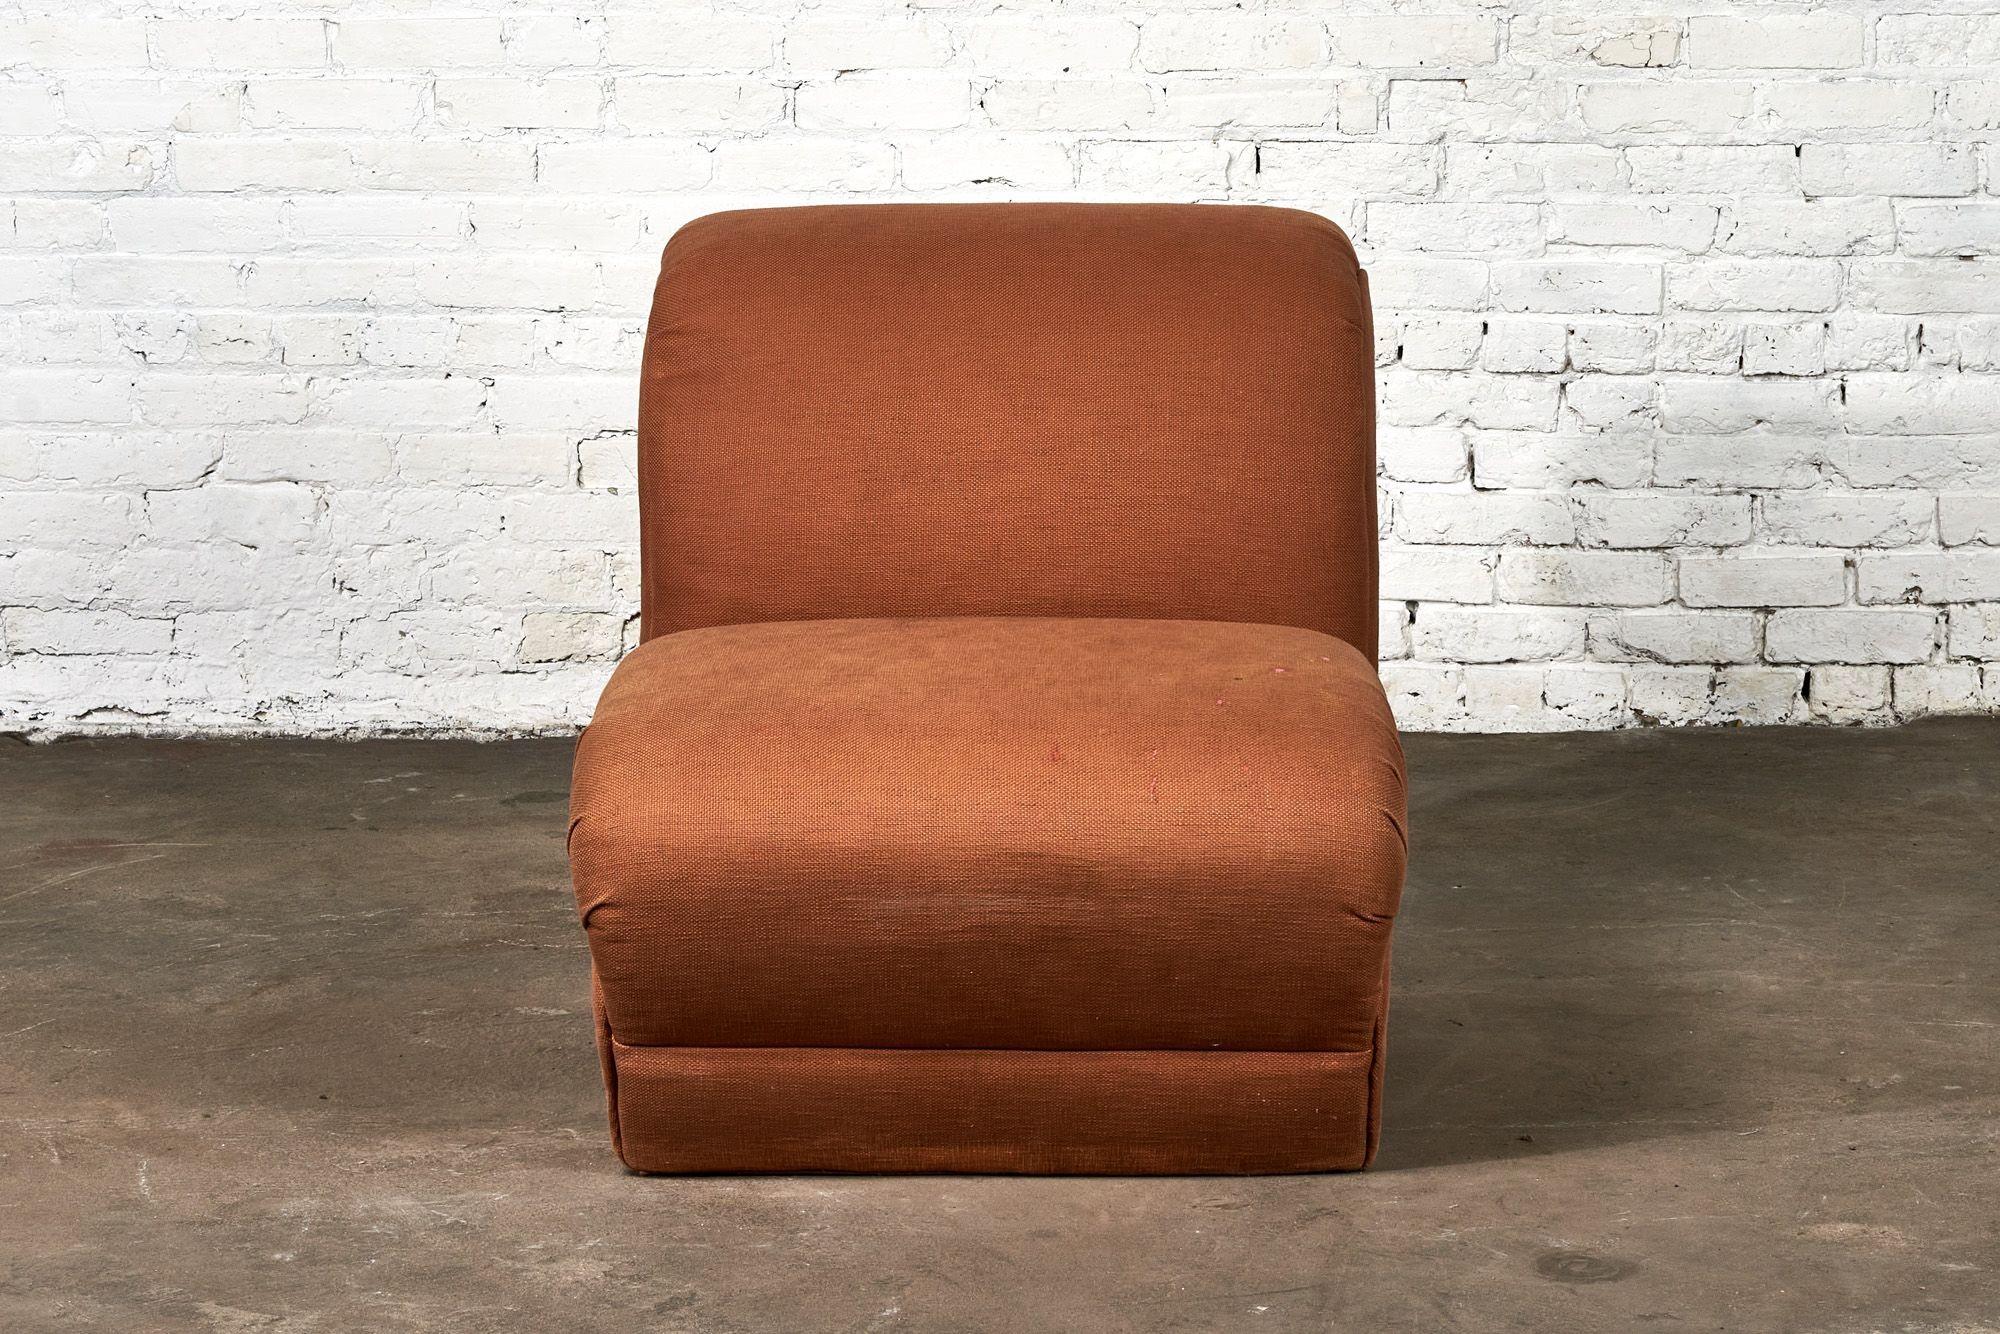 Postmodern Sculptural slipper lounge chair, 1960. Original upholstery, wear consistent with age and use.